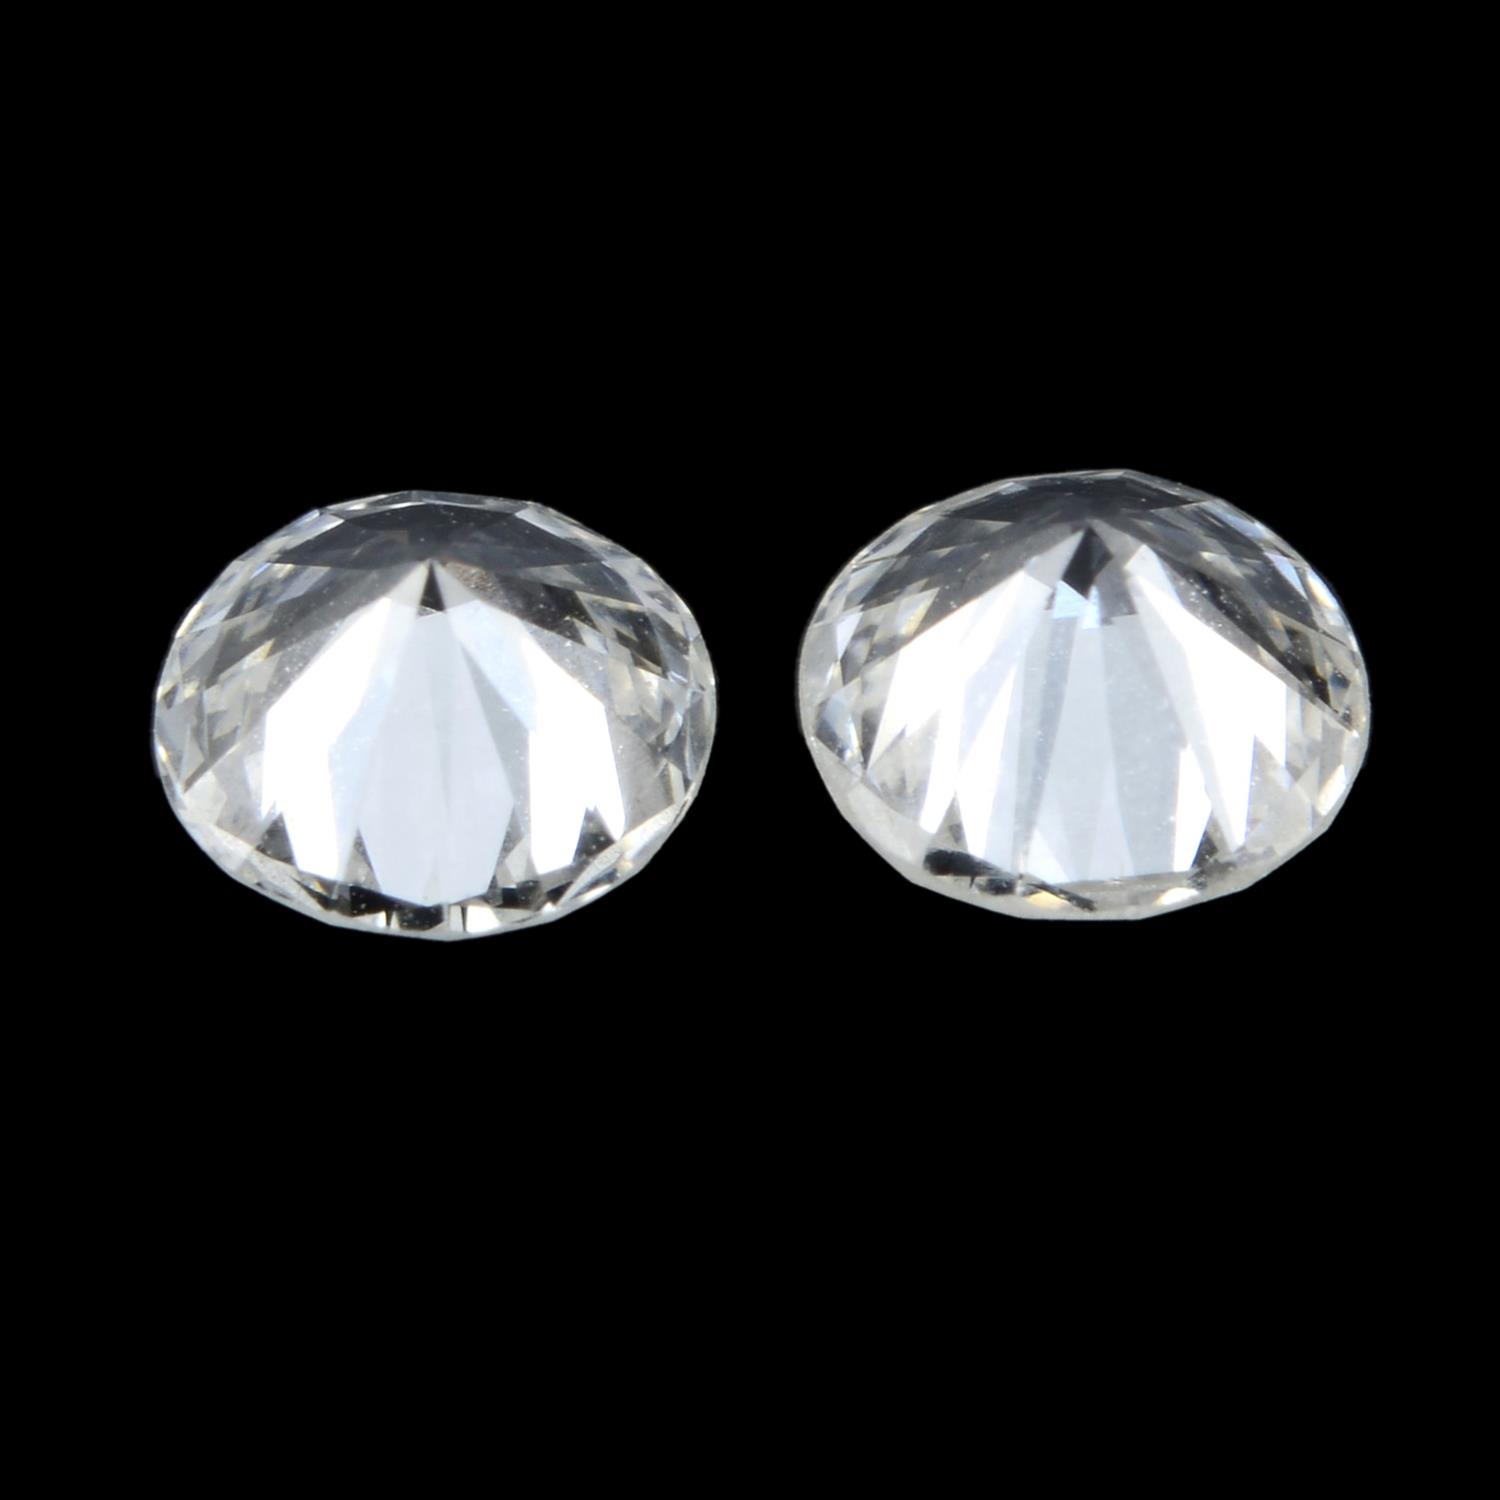 Pair of brilliant cut diamonds weighing 0.50ct - Image 2 of 2